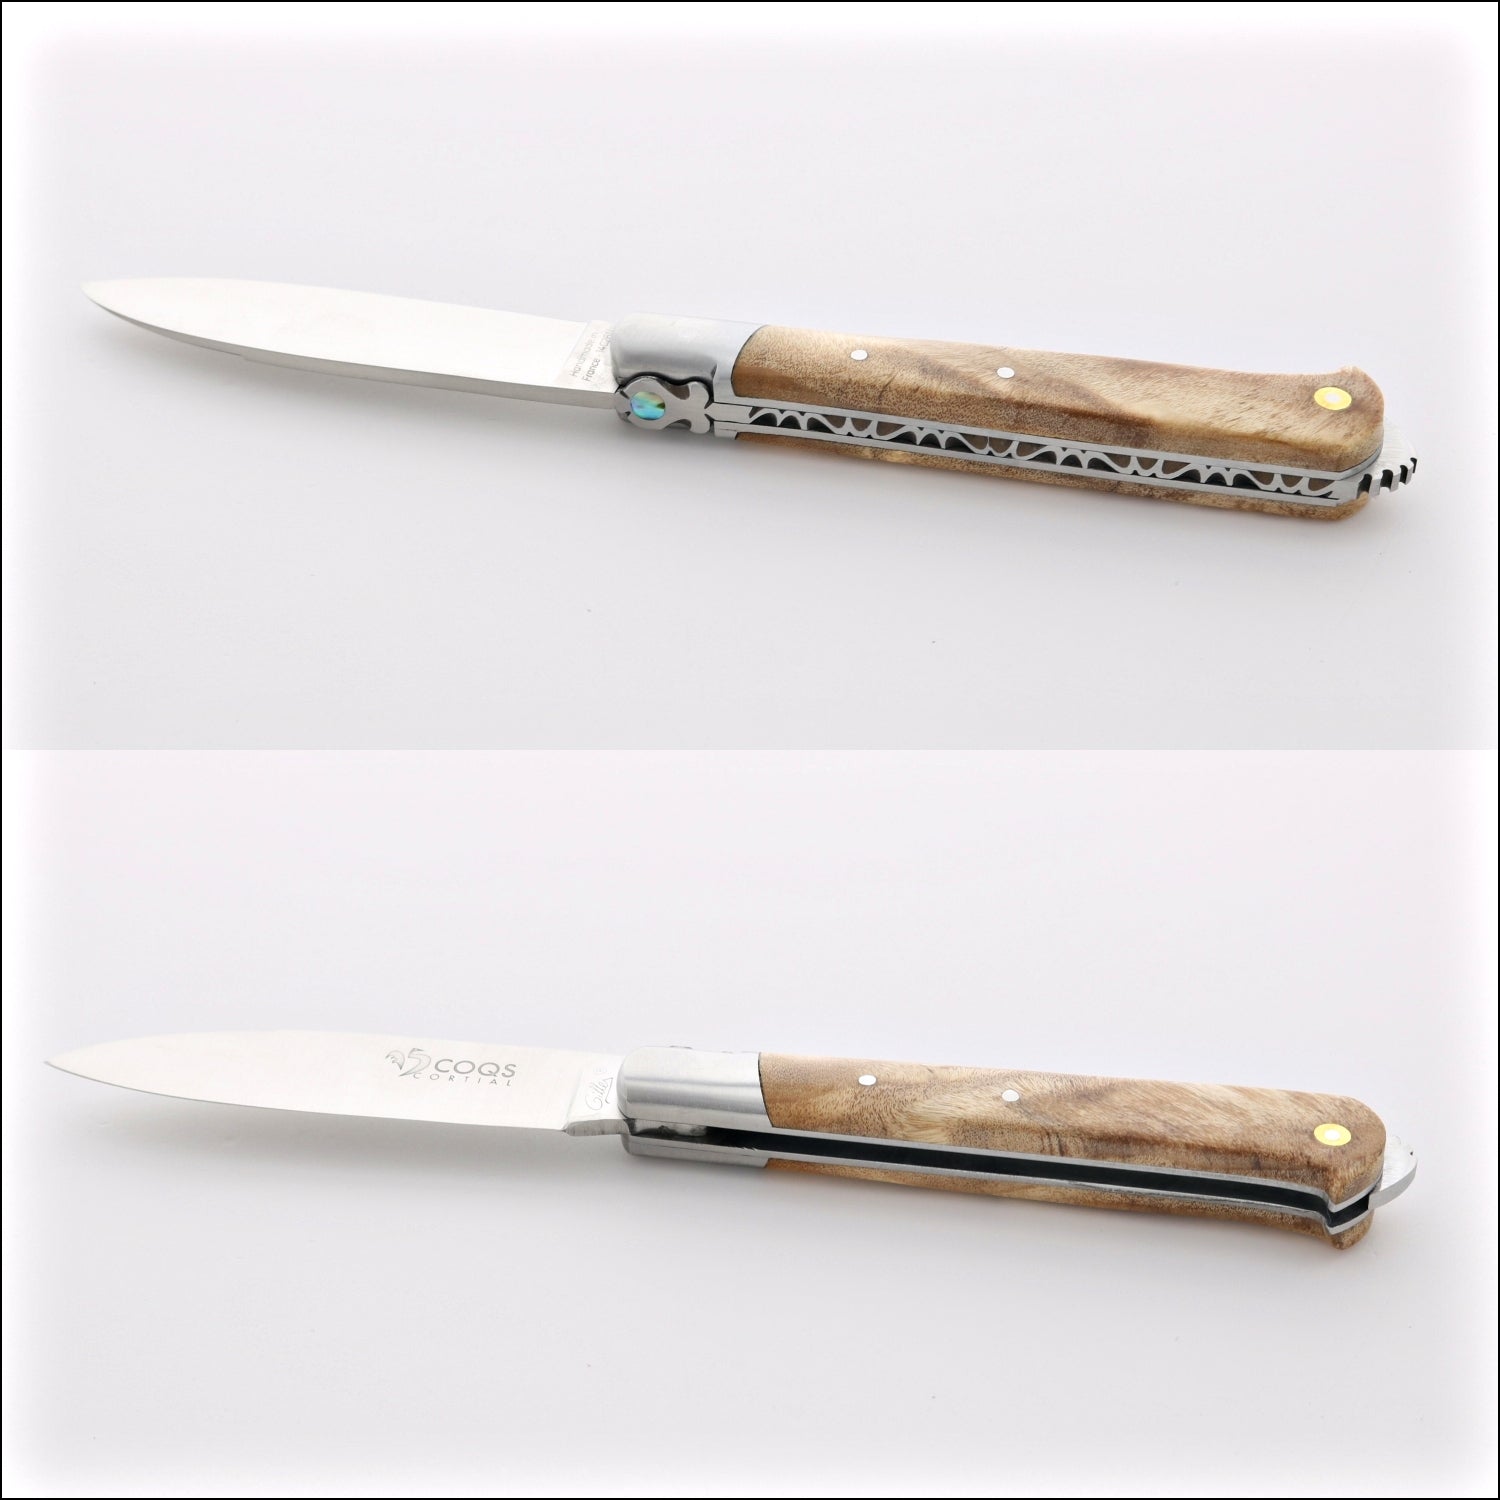 5 Coqs Pocket Knife - Stabilized Poplar Burl & Mother of Pearl Inlay